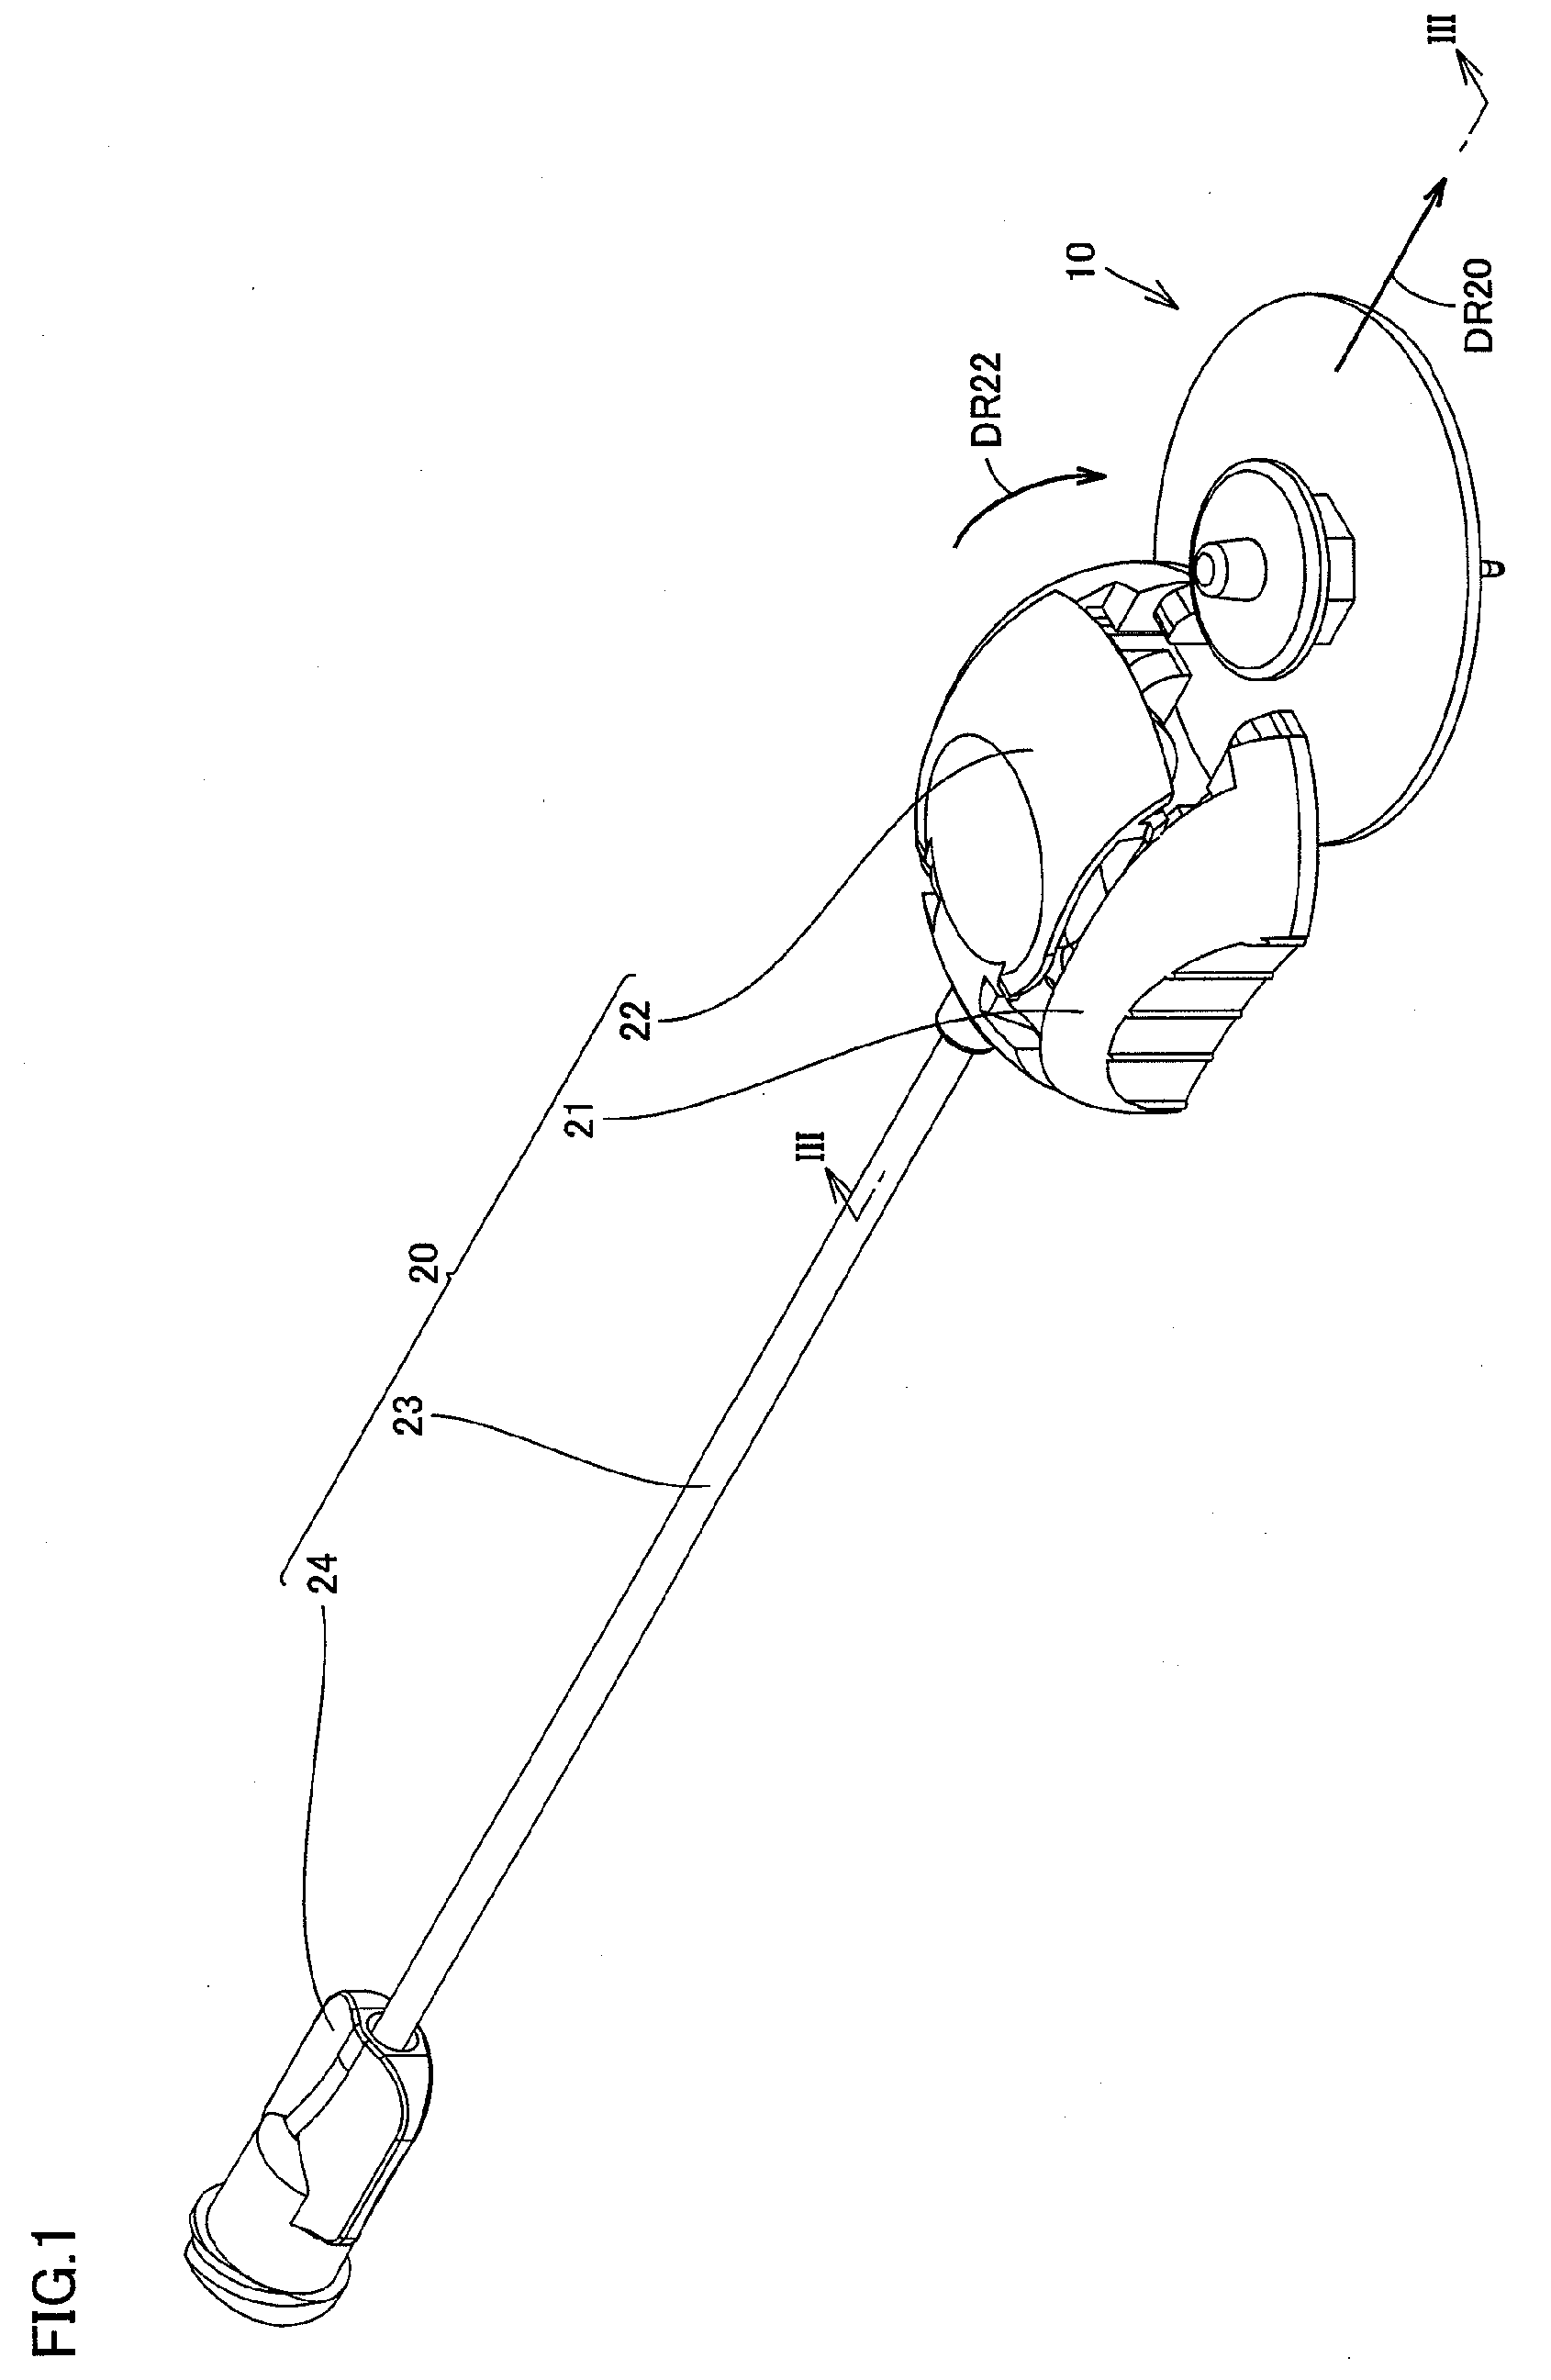 Subcutaneous infusion device